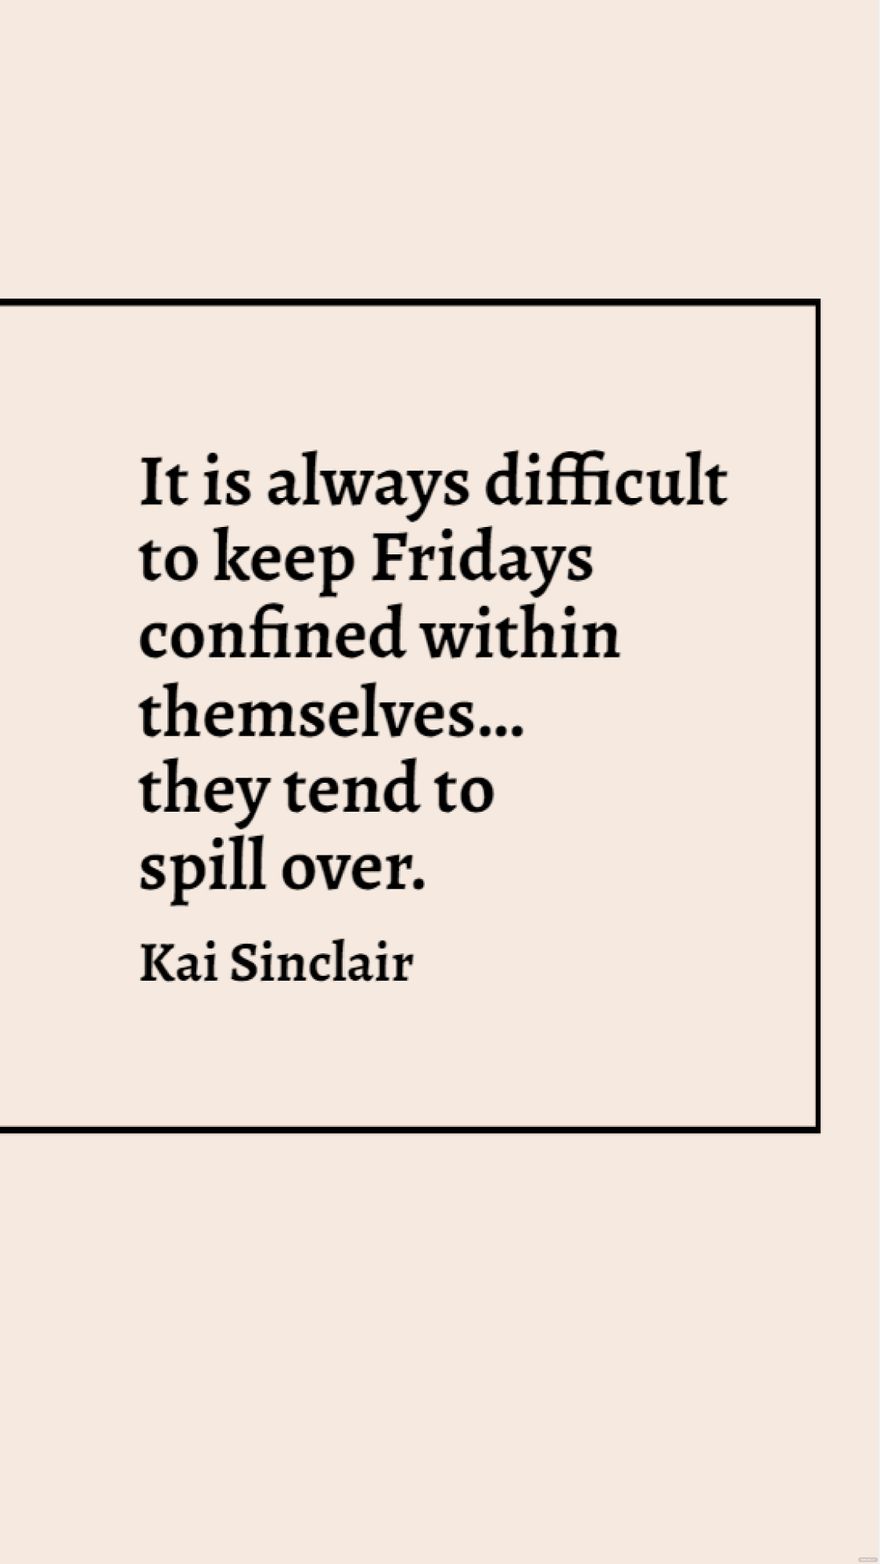 Kai Sinclair - It is always difficult to keep Fridays confined within themselves…they tend to spill over. in JPG